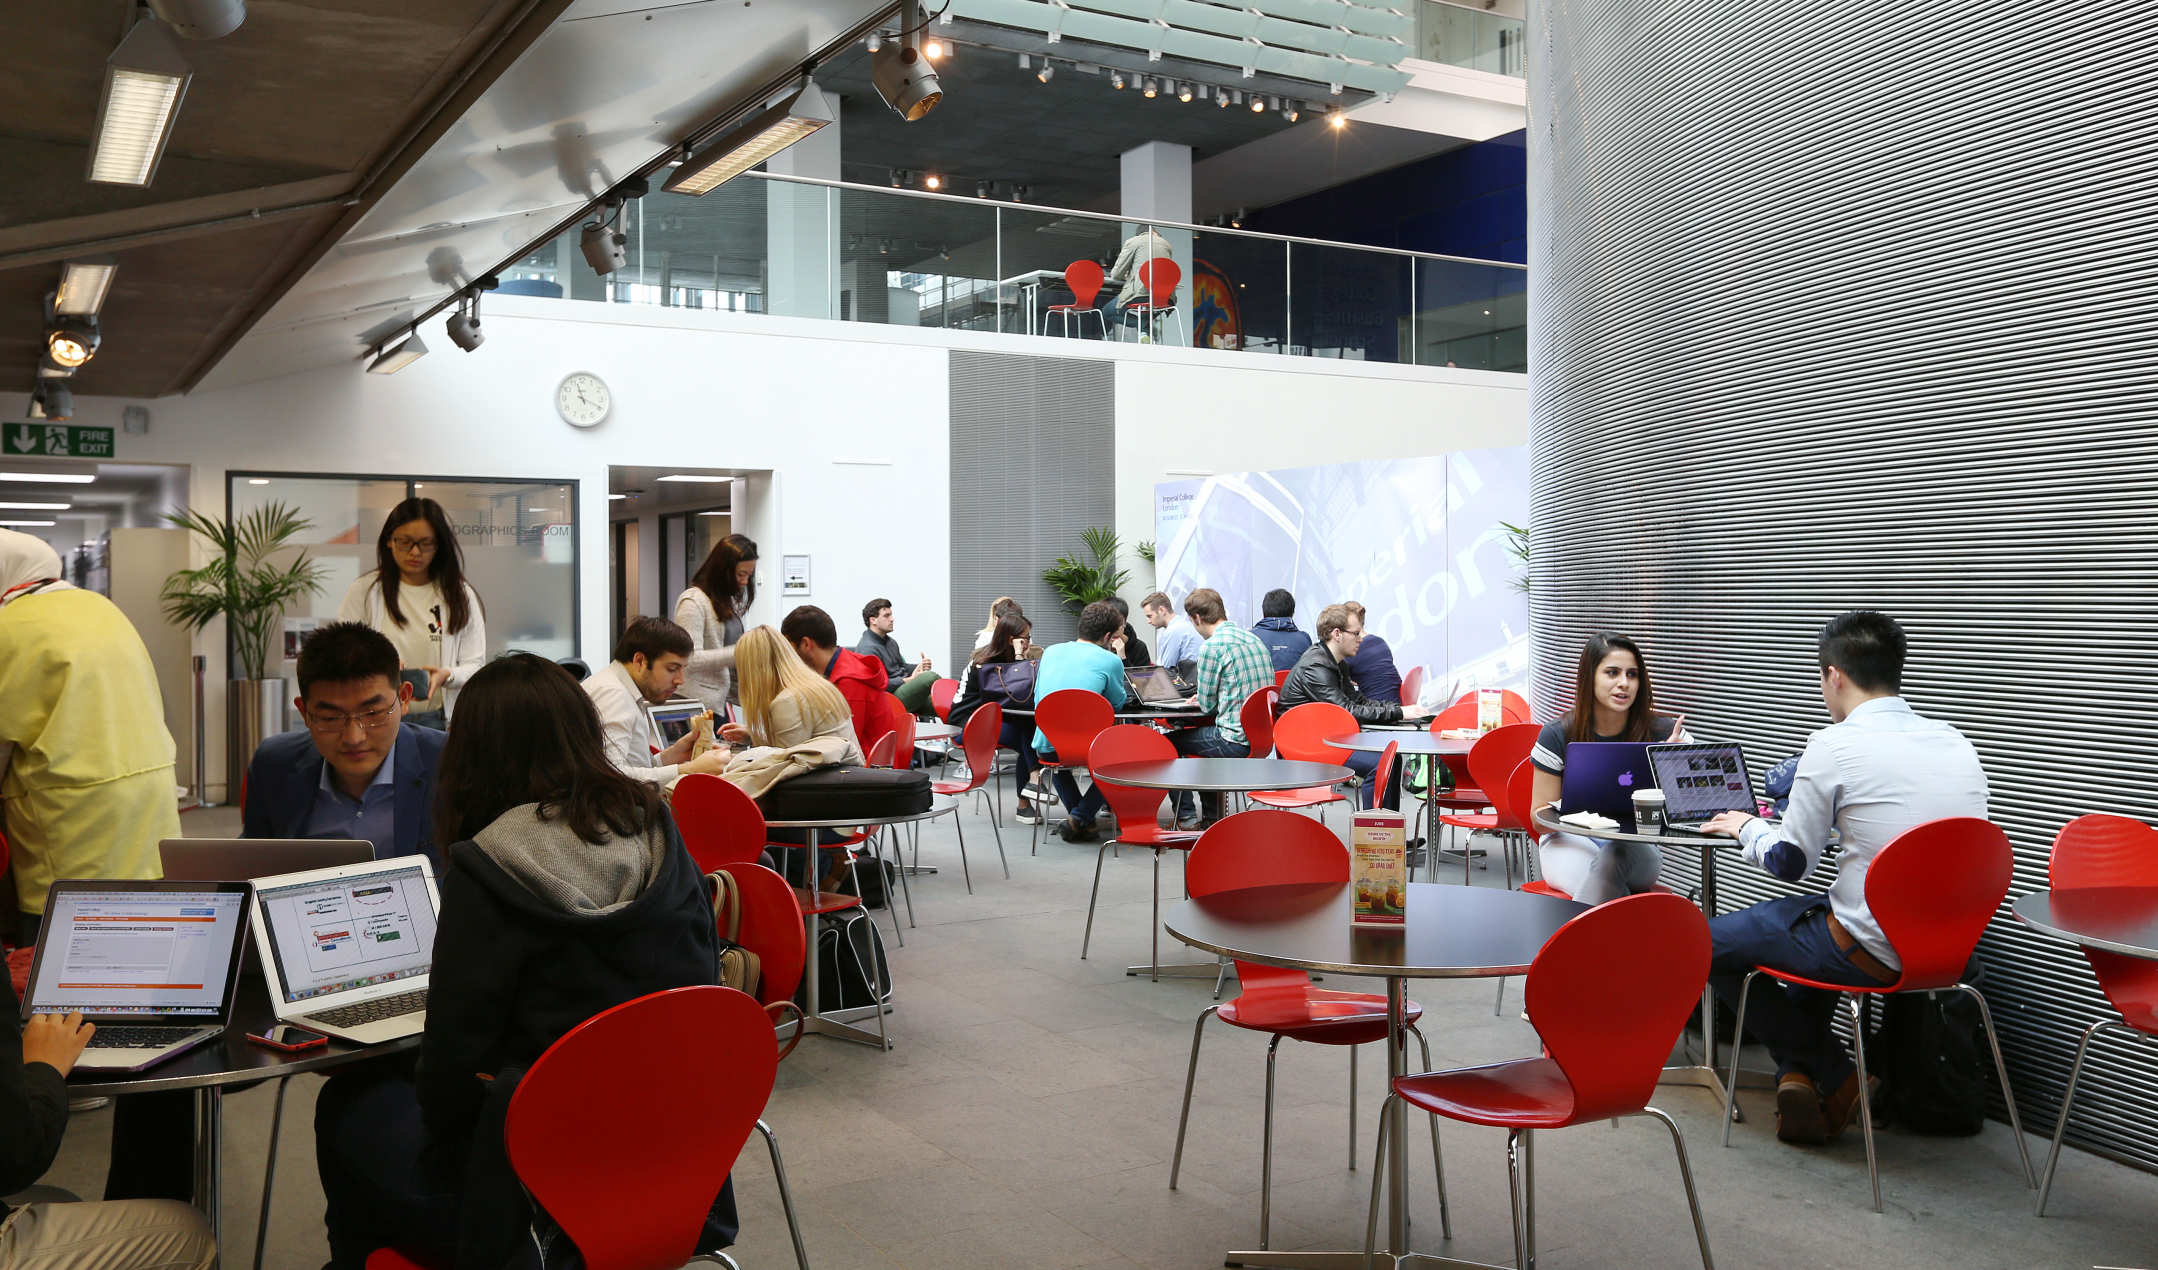 Business School Cafe Administration And Support Services Imperial College London